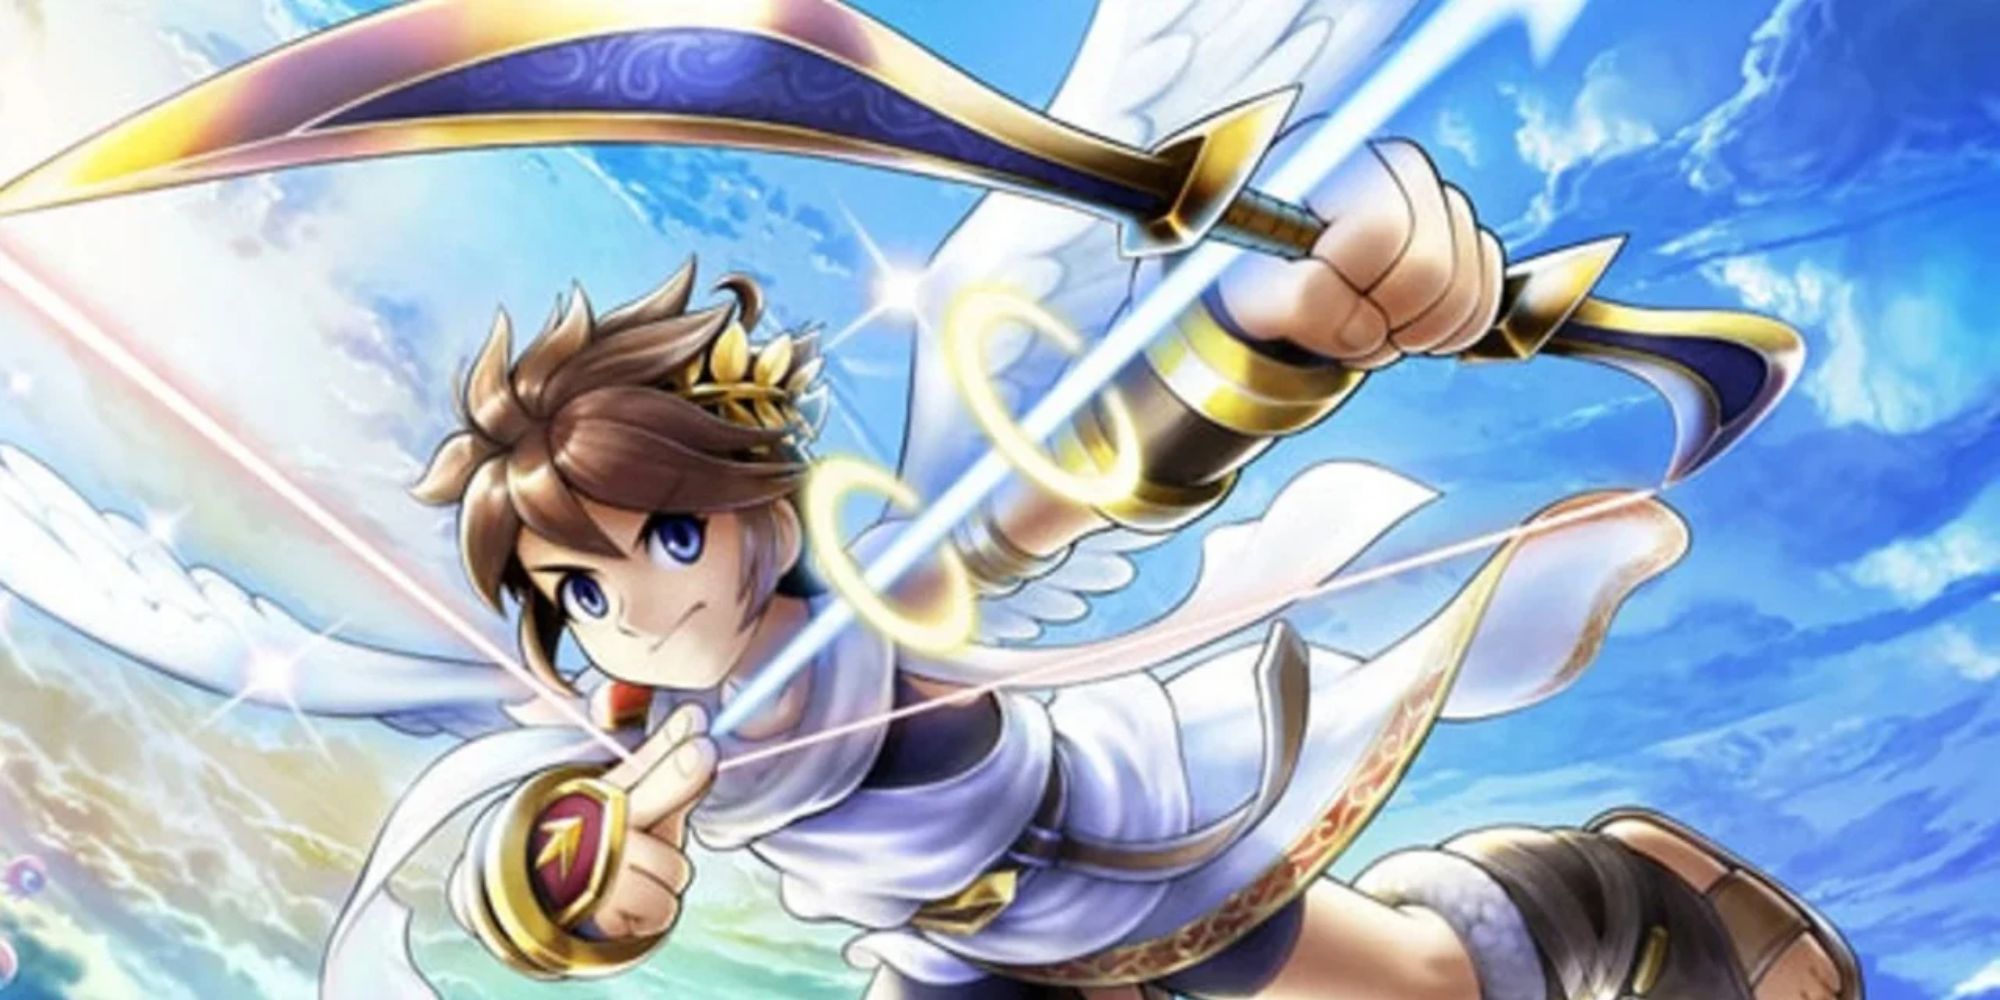 Pit flying in Kid Icarus: Uprising.